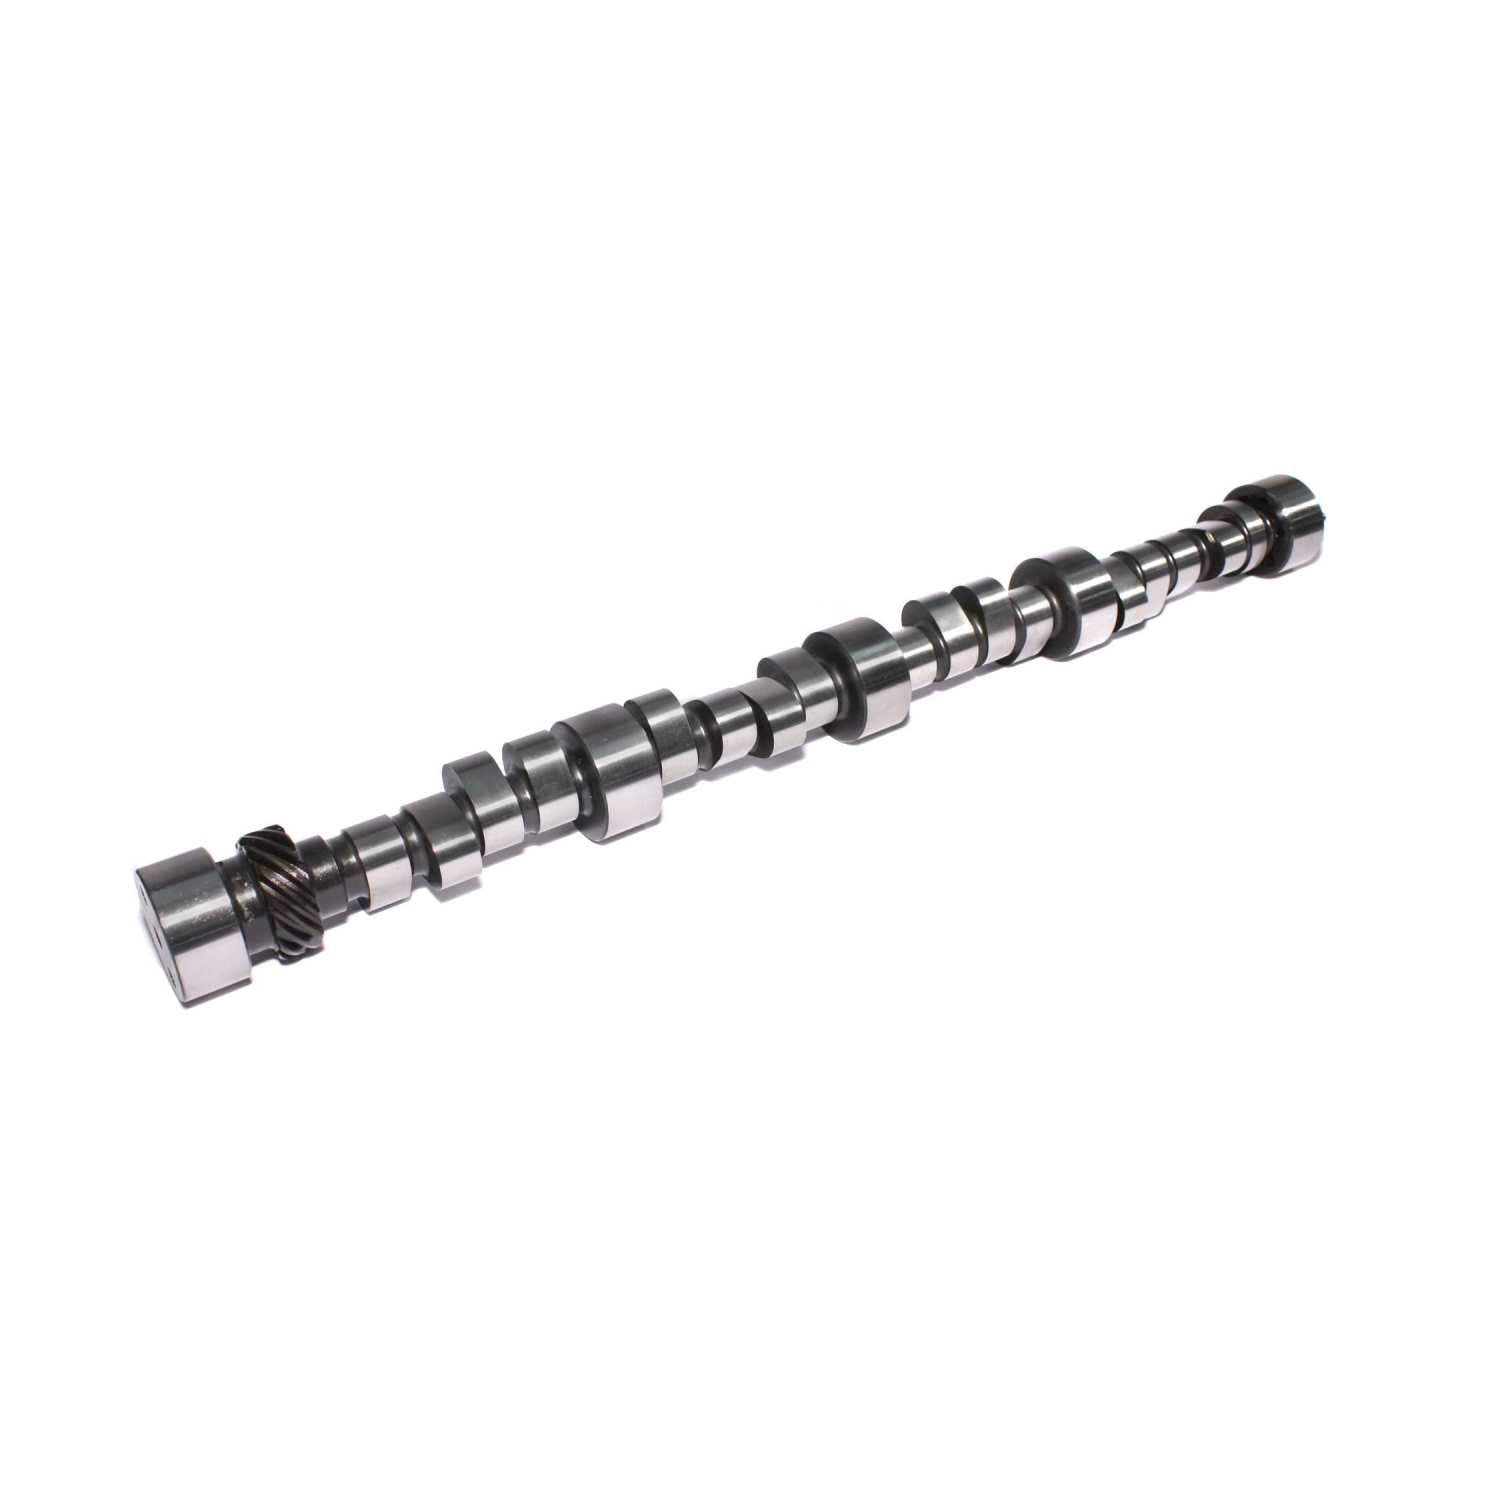 Competition Cams 11-738-9 Drag Race Camshaft